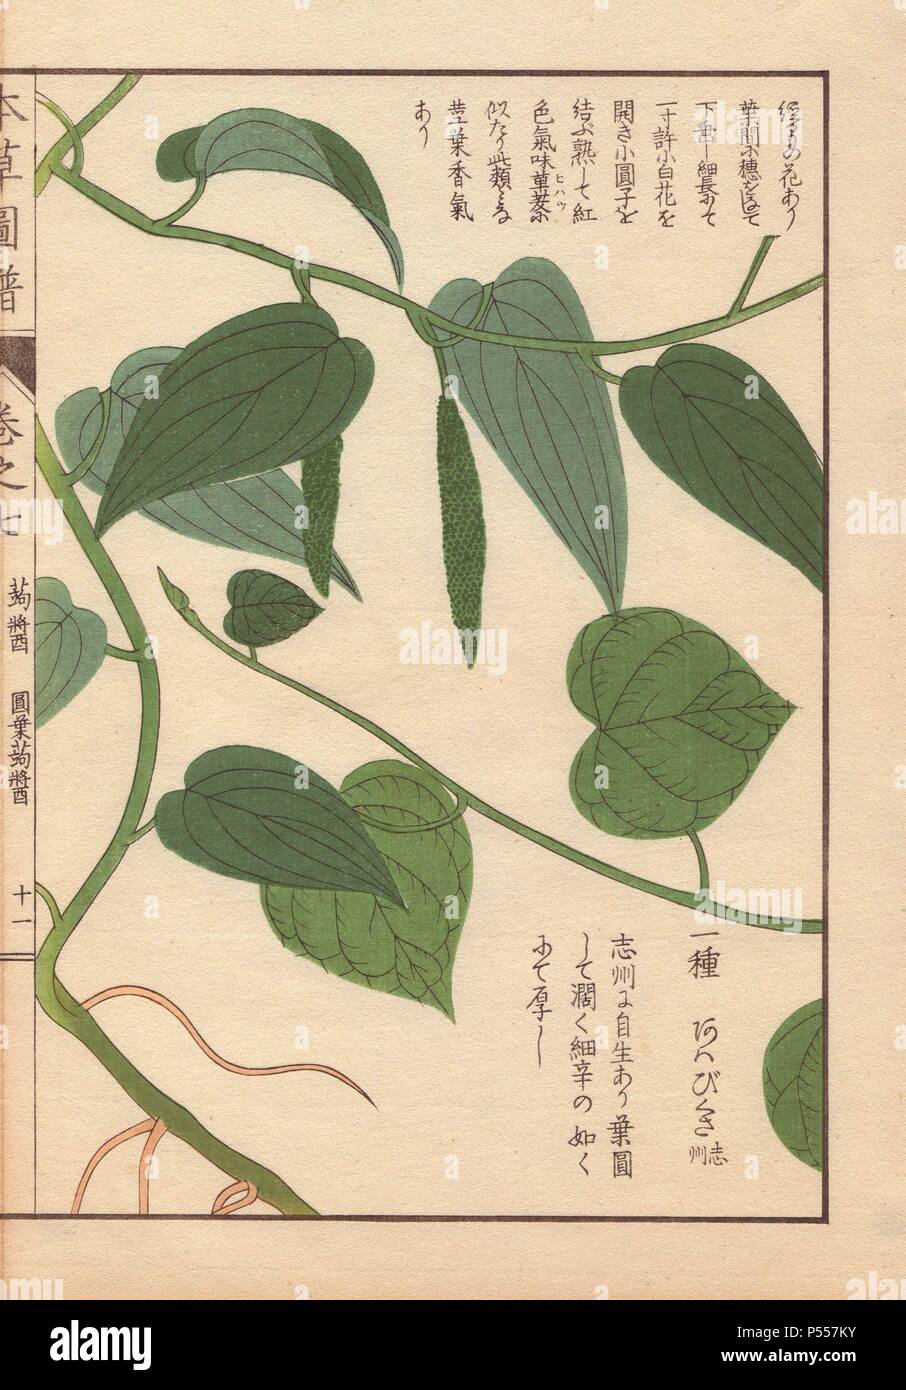 Leaves and stems of Japanese pepper, Piper futo-kadzura Sieb. . Colour-printed woodblock engraving by Kan'en Iwasaki from 'Honzo Zufu,' an Illustrated Guide to Medicinal Plants, 1884. Iwasaki (1786-1842) was a Japanese botanist, entomologist and zoologist. He was one of the first Japanese botanists to incorporate western knowledge into his studies. Stock Photo